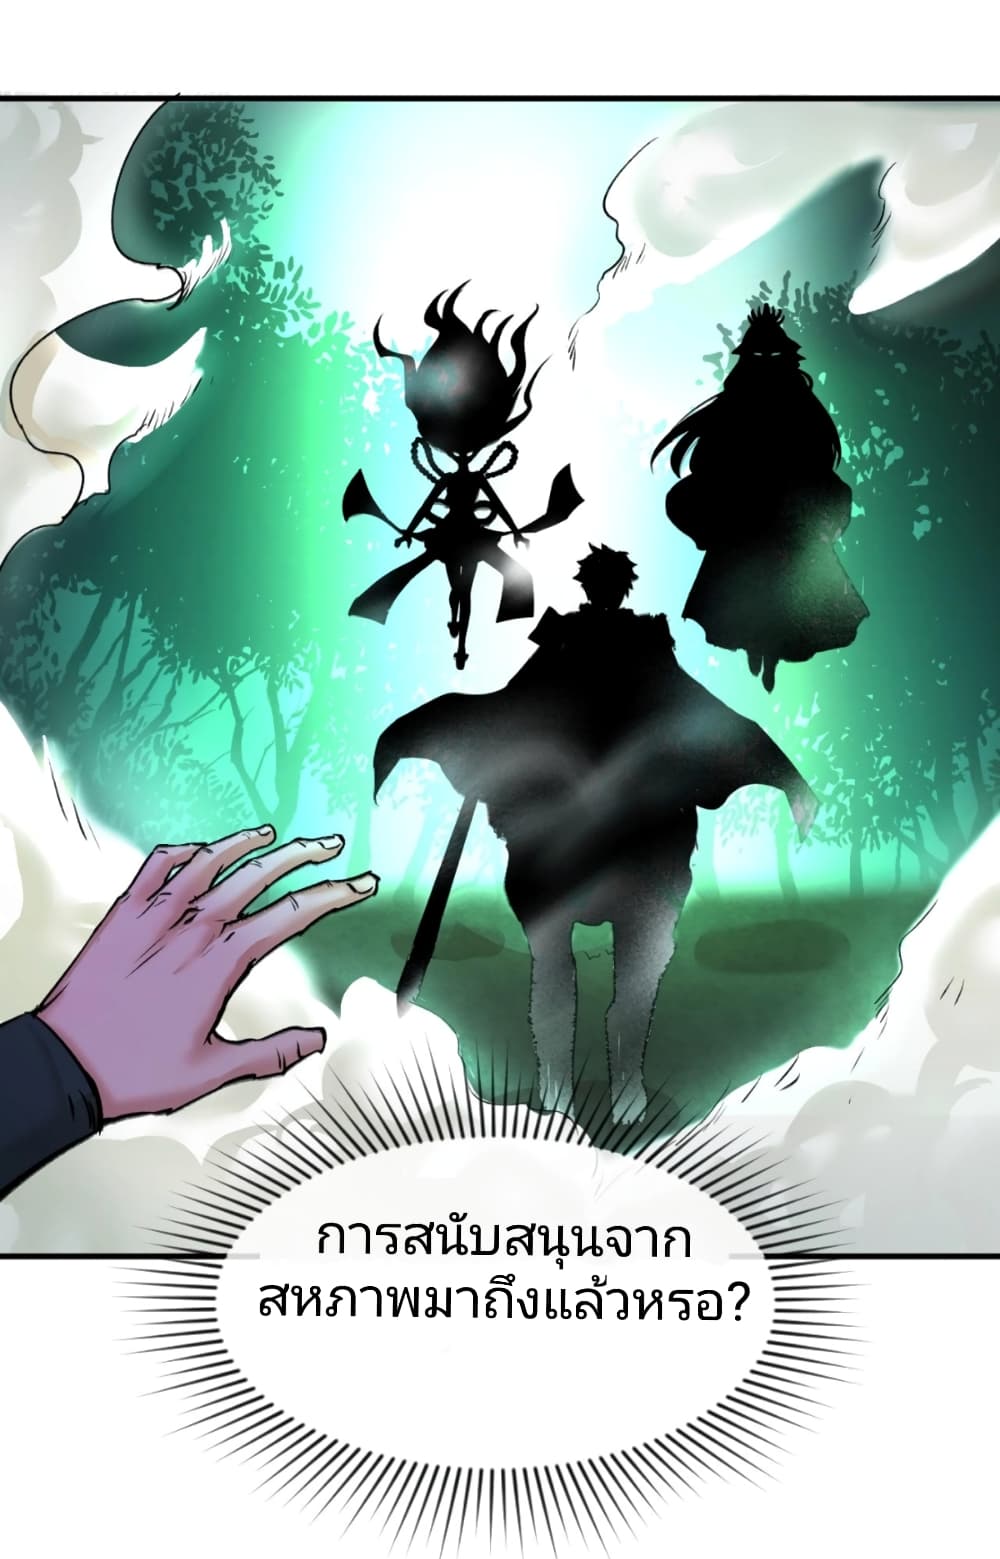 The Age of Ghost Spirits à¸à¸­à¸à¸à¸µà¹ 29 (15)